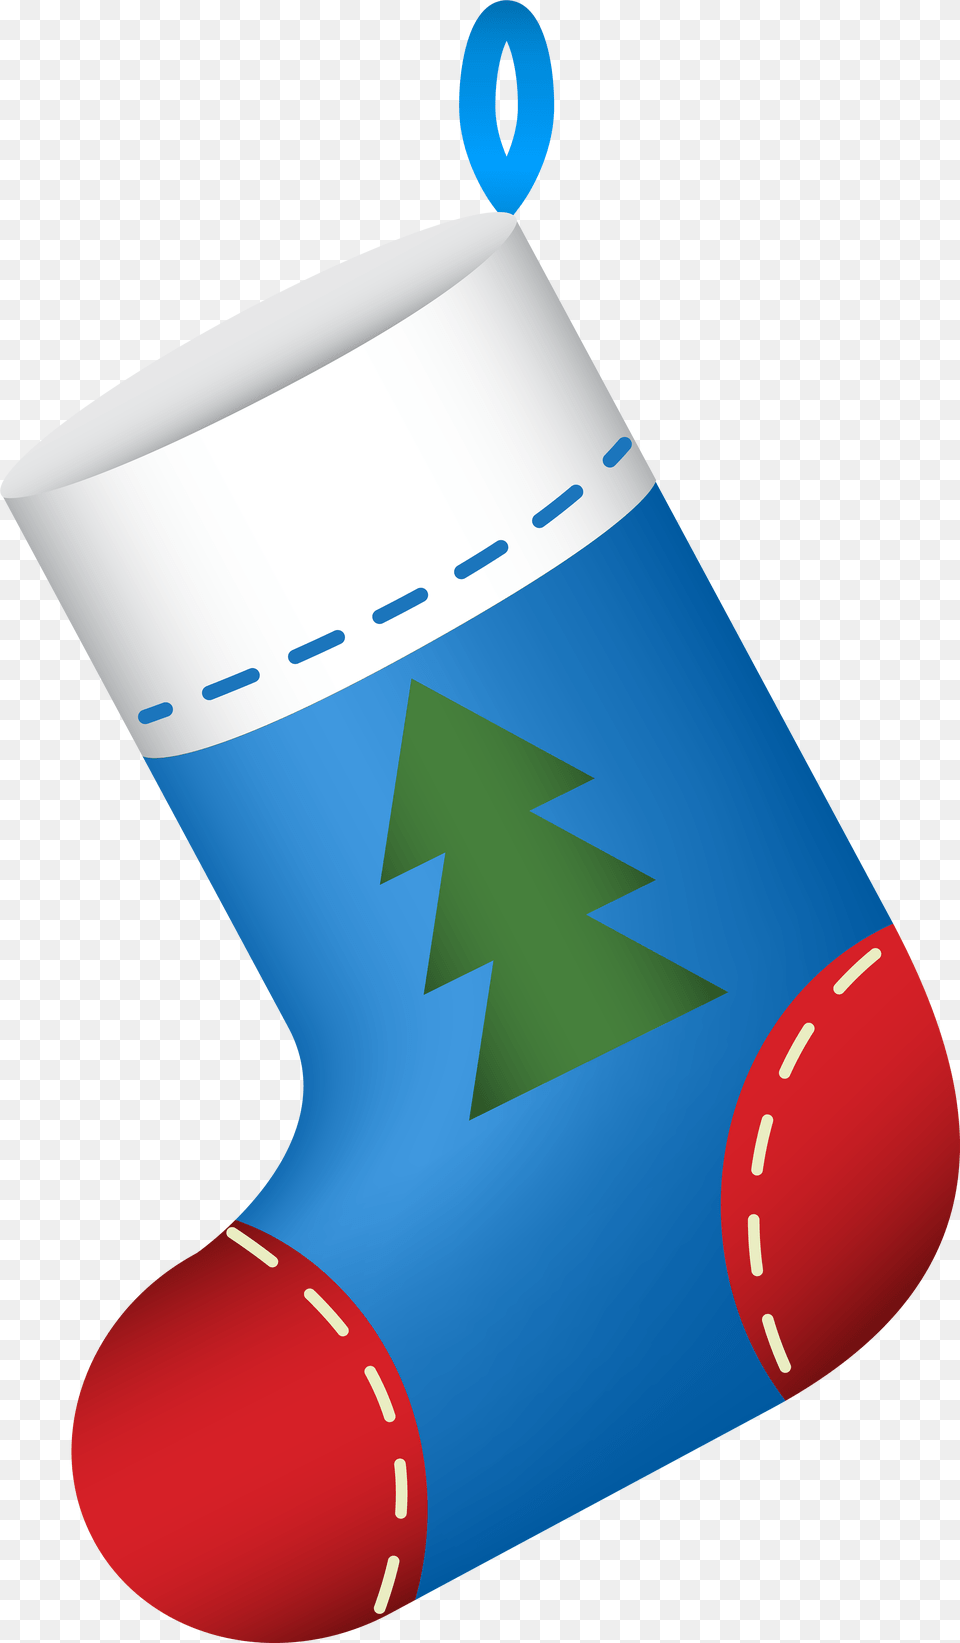 Christmas Stocking Blue Clip Art Gallery Clip Art Christmas Socks, Clothing, Hosiery, Christmas Decorations, Festival Png Image